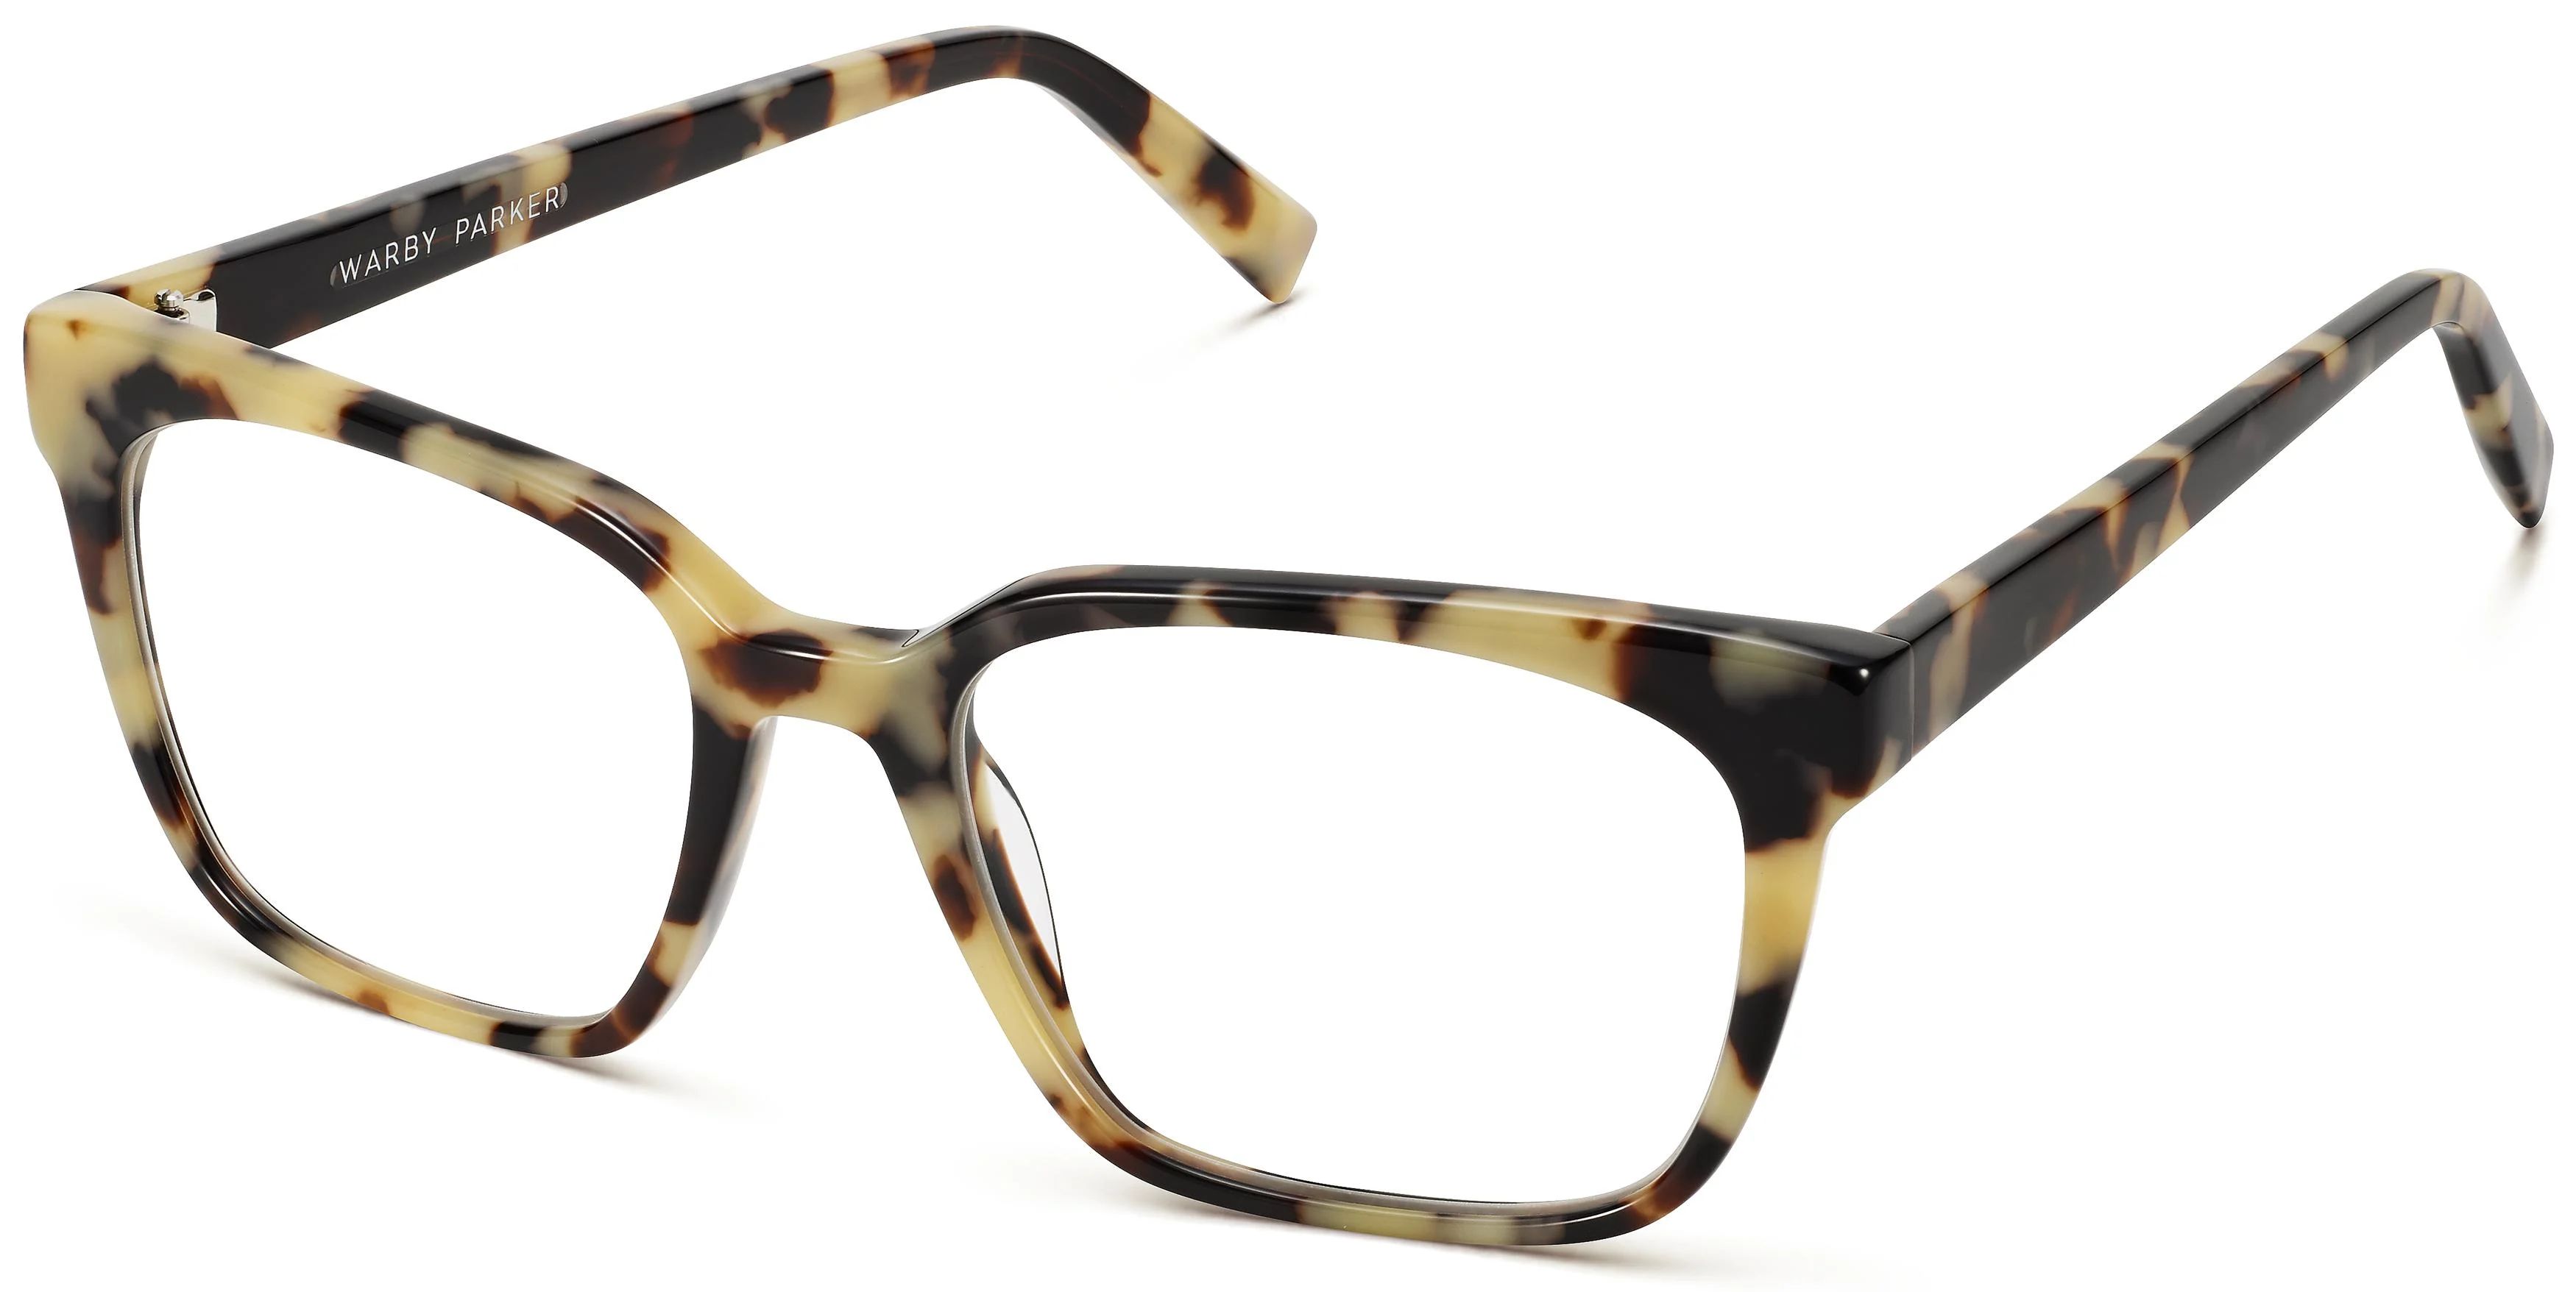 Hughes Eyeglasses in Marzipan Tortoise | Warby Parker | Warby Parker (US)